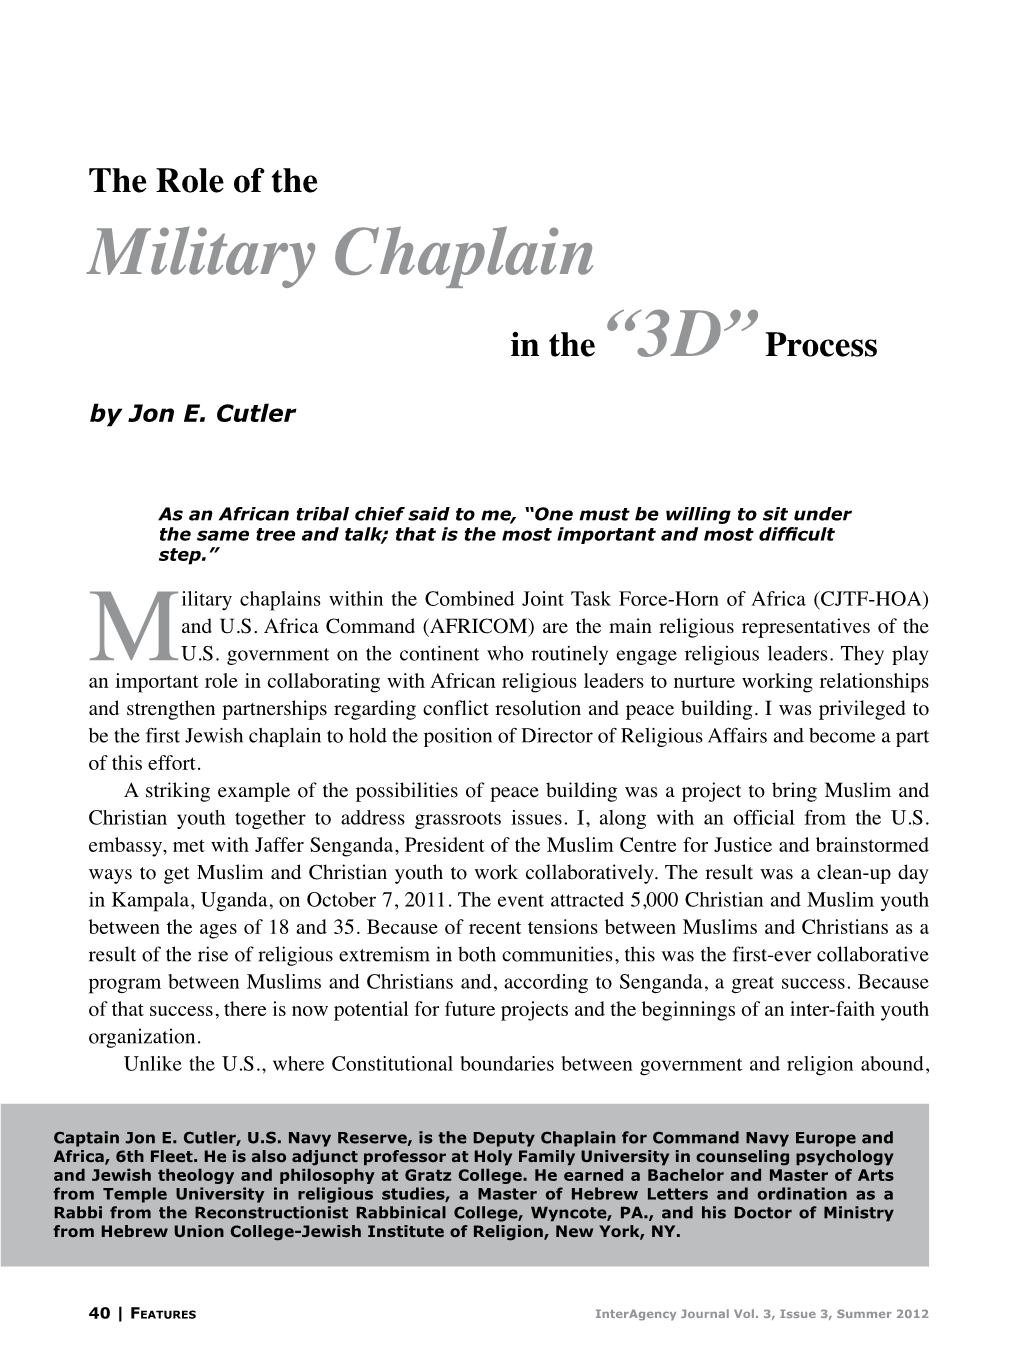 Military Chaplain in the “3D” Process by Jon E